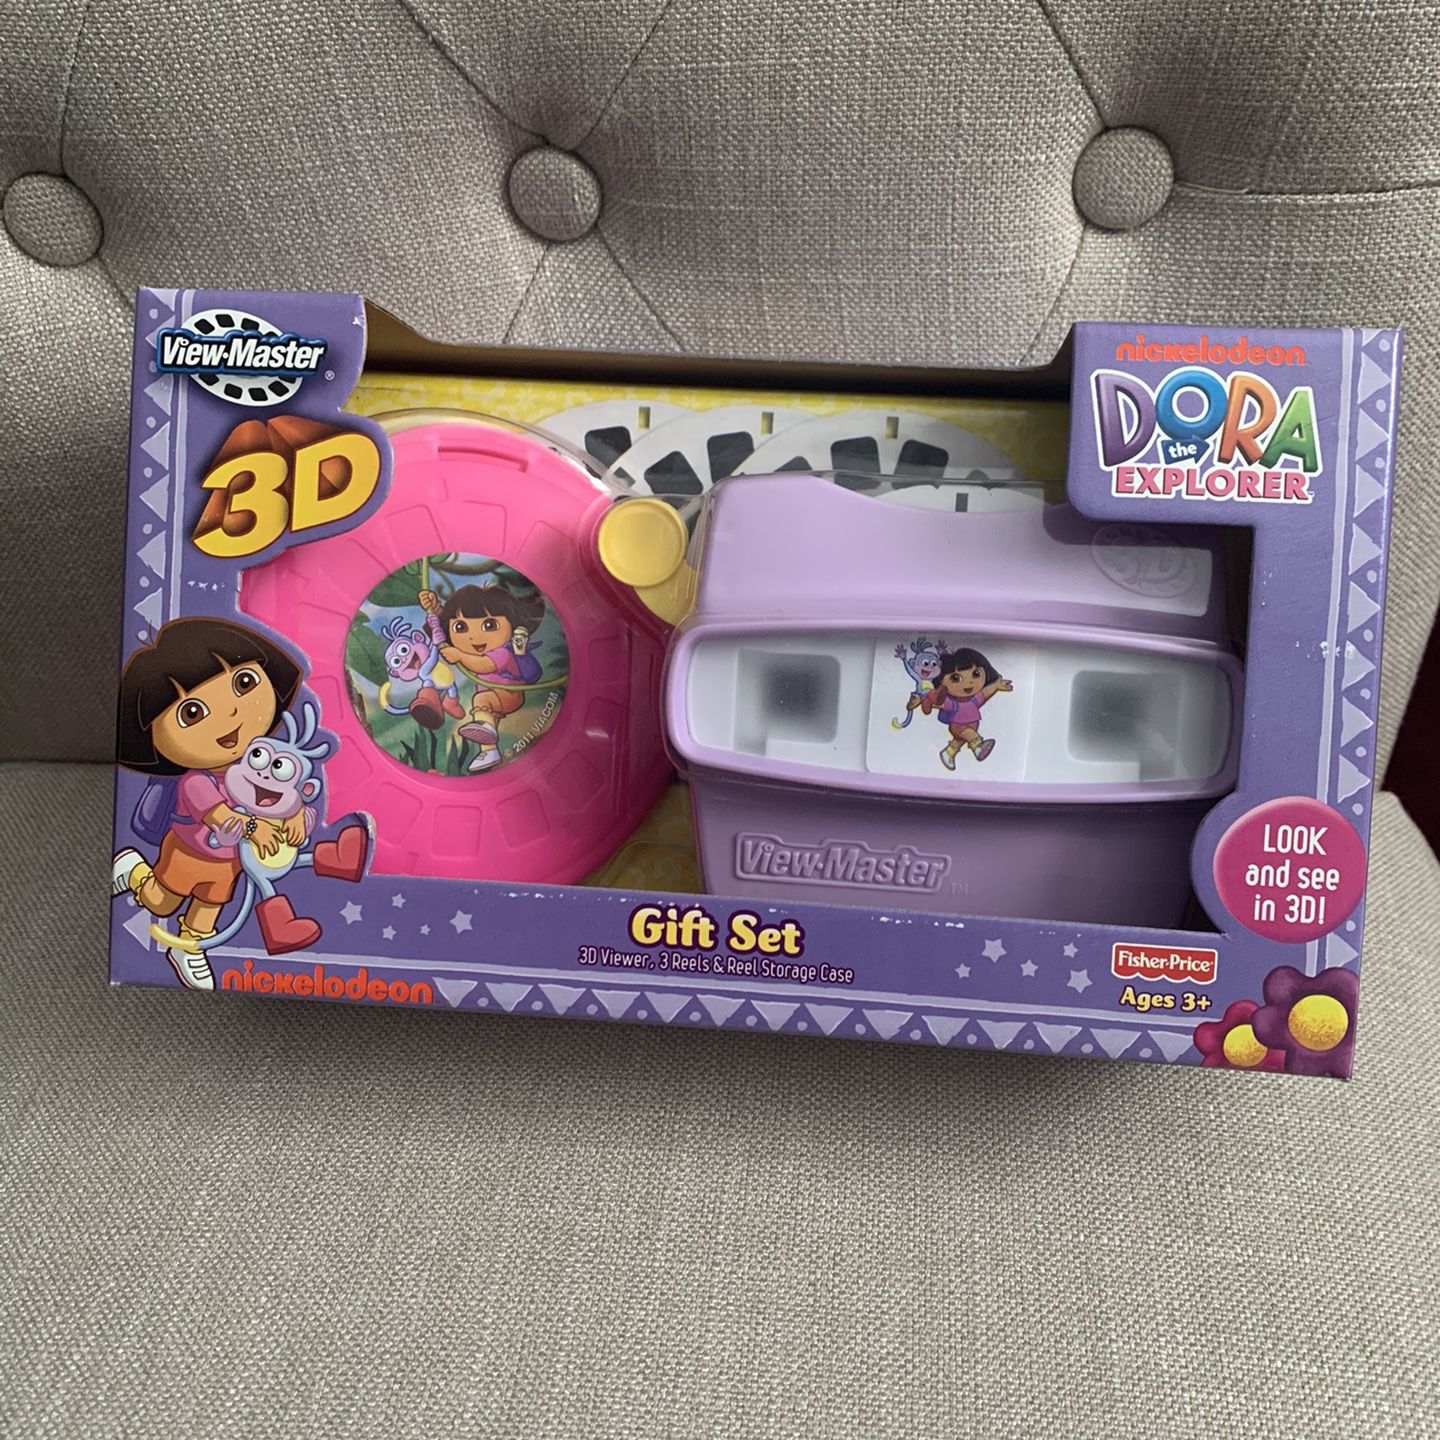 Dora 3D View Master Gift Set for Sale in Hamburg, NY - OfferUp